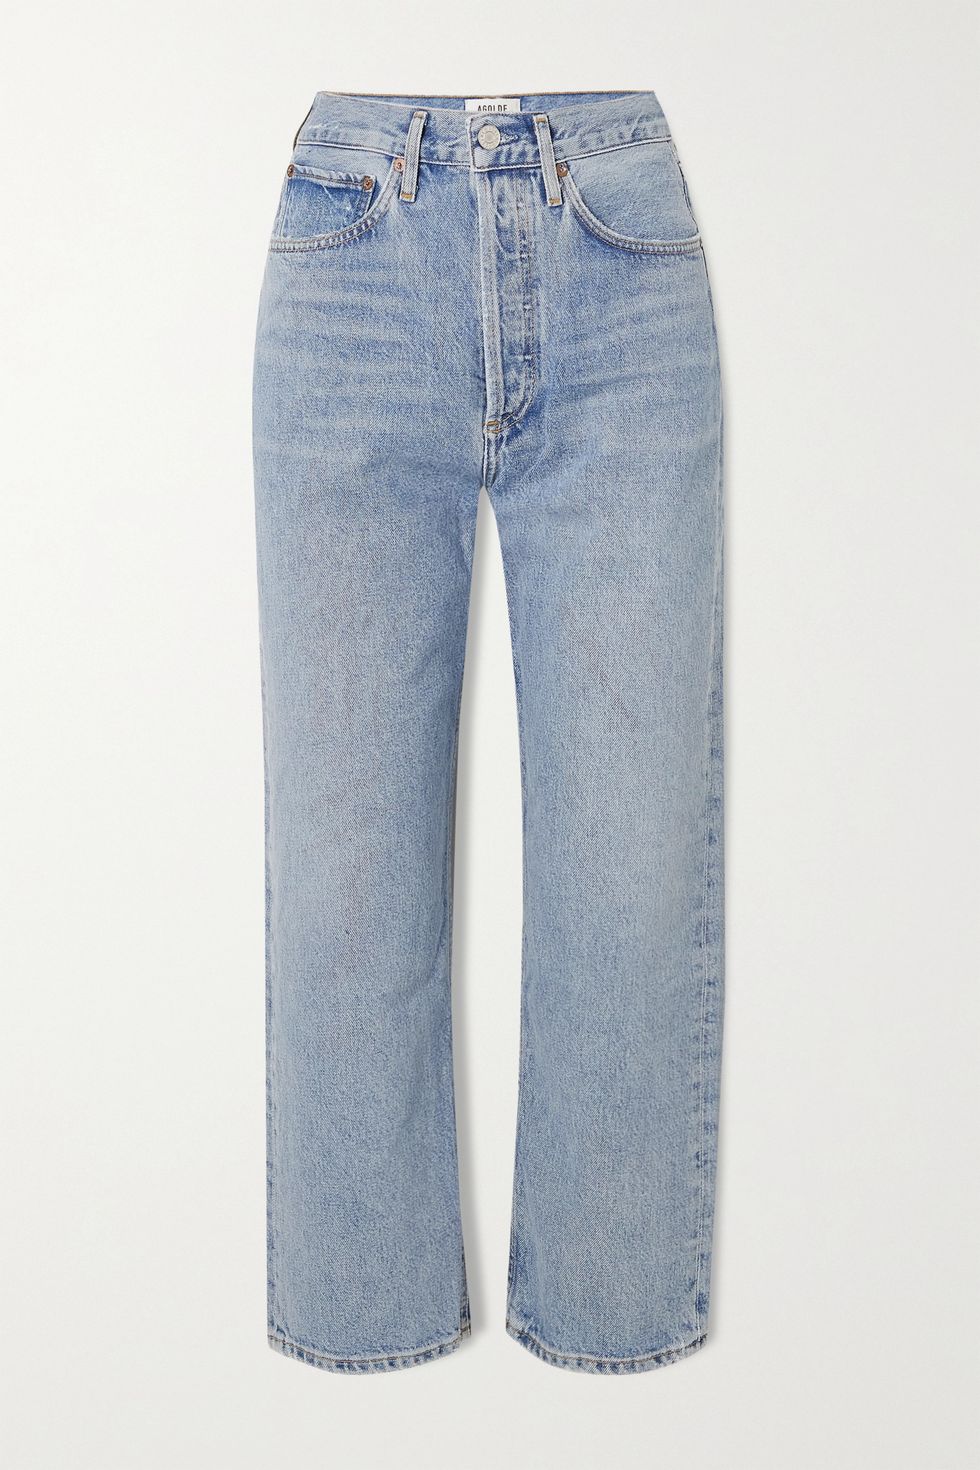 + NET SUSTAIN '90s cropped organic high-rise straight-leg jeans